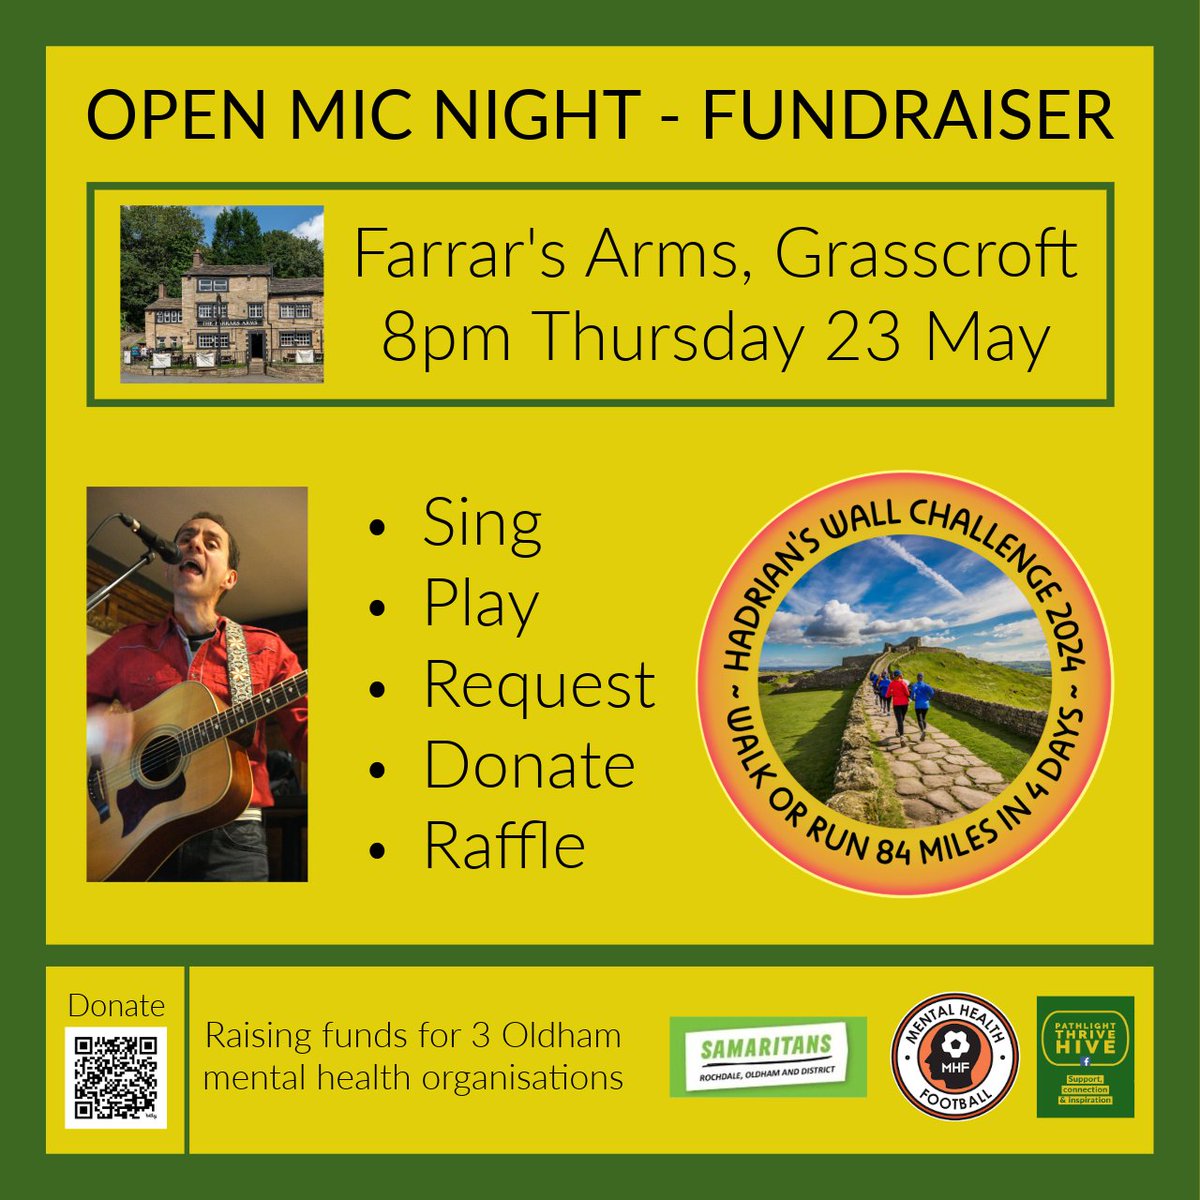 Enjoy great music + raffle @farrarsarms next Thursday whilst raising funds for 3 Oldham mental health organisations. Come and support Paul's epic Hadrian's Wall run... sing, play or request some songs. Guitar provided, or bring your own.

#OldhamHour #openmic @roch_samaritans